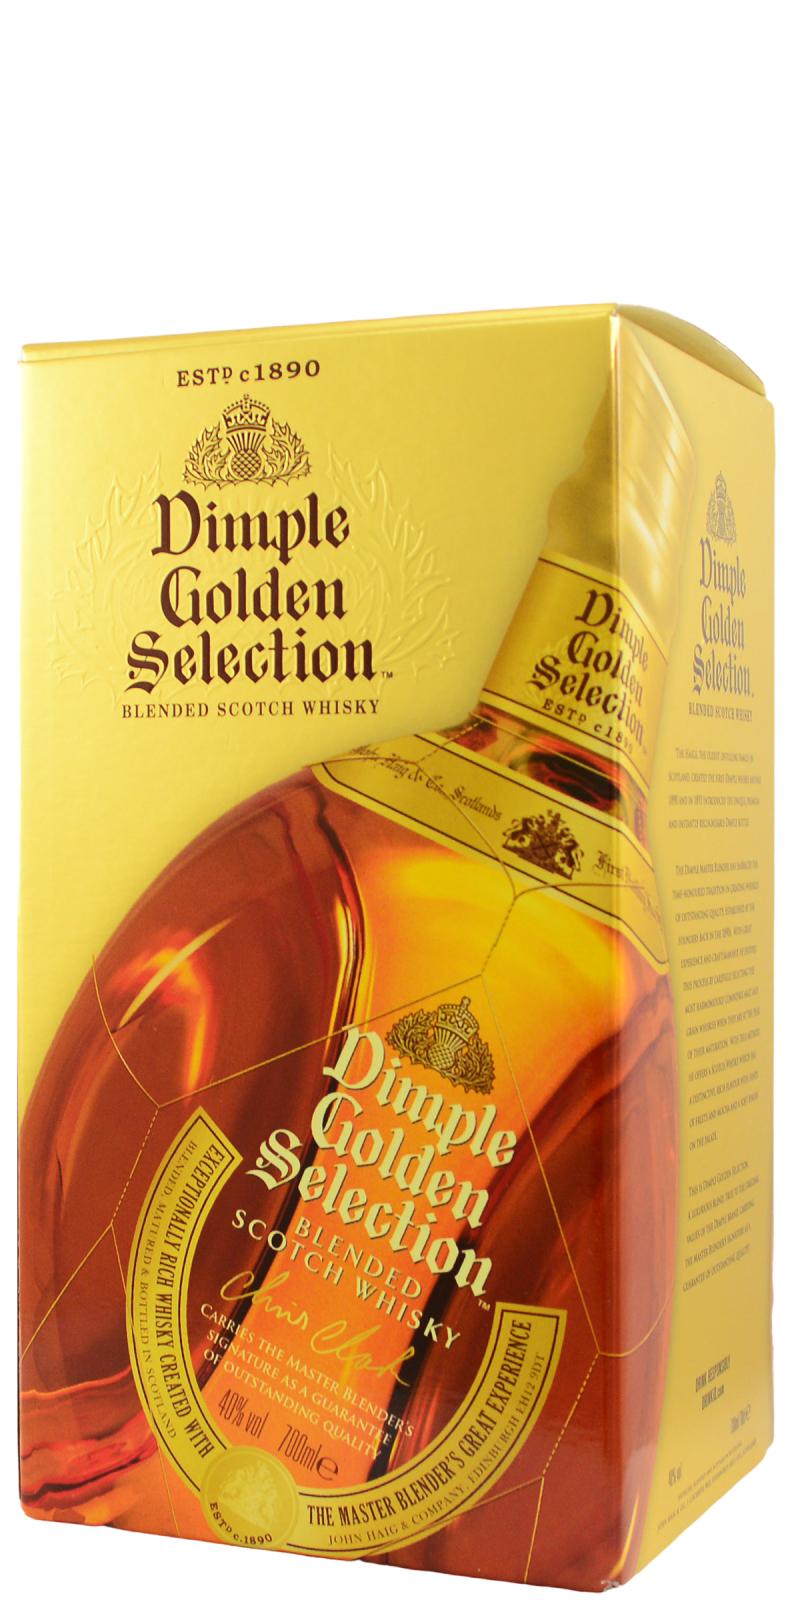 Dimple Golden Selection